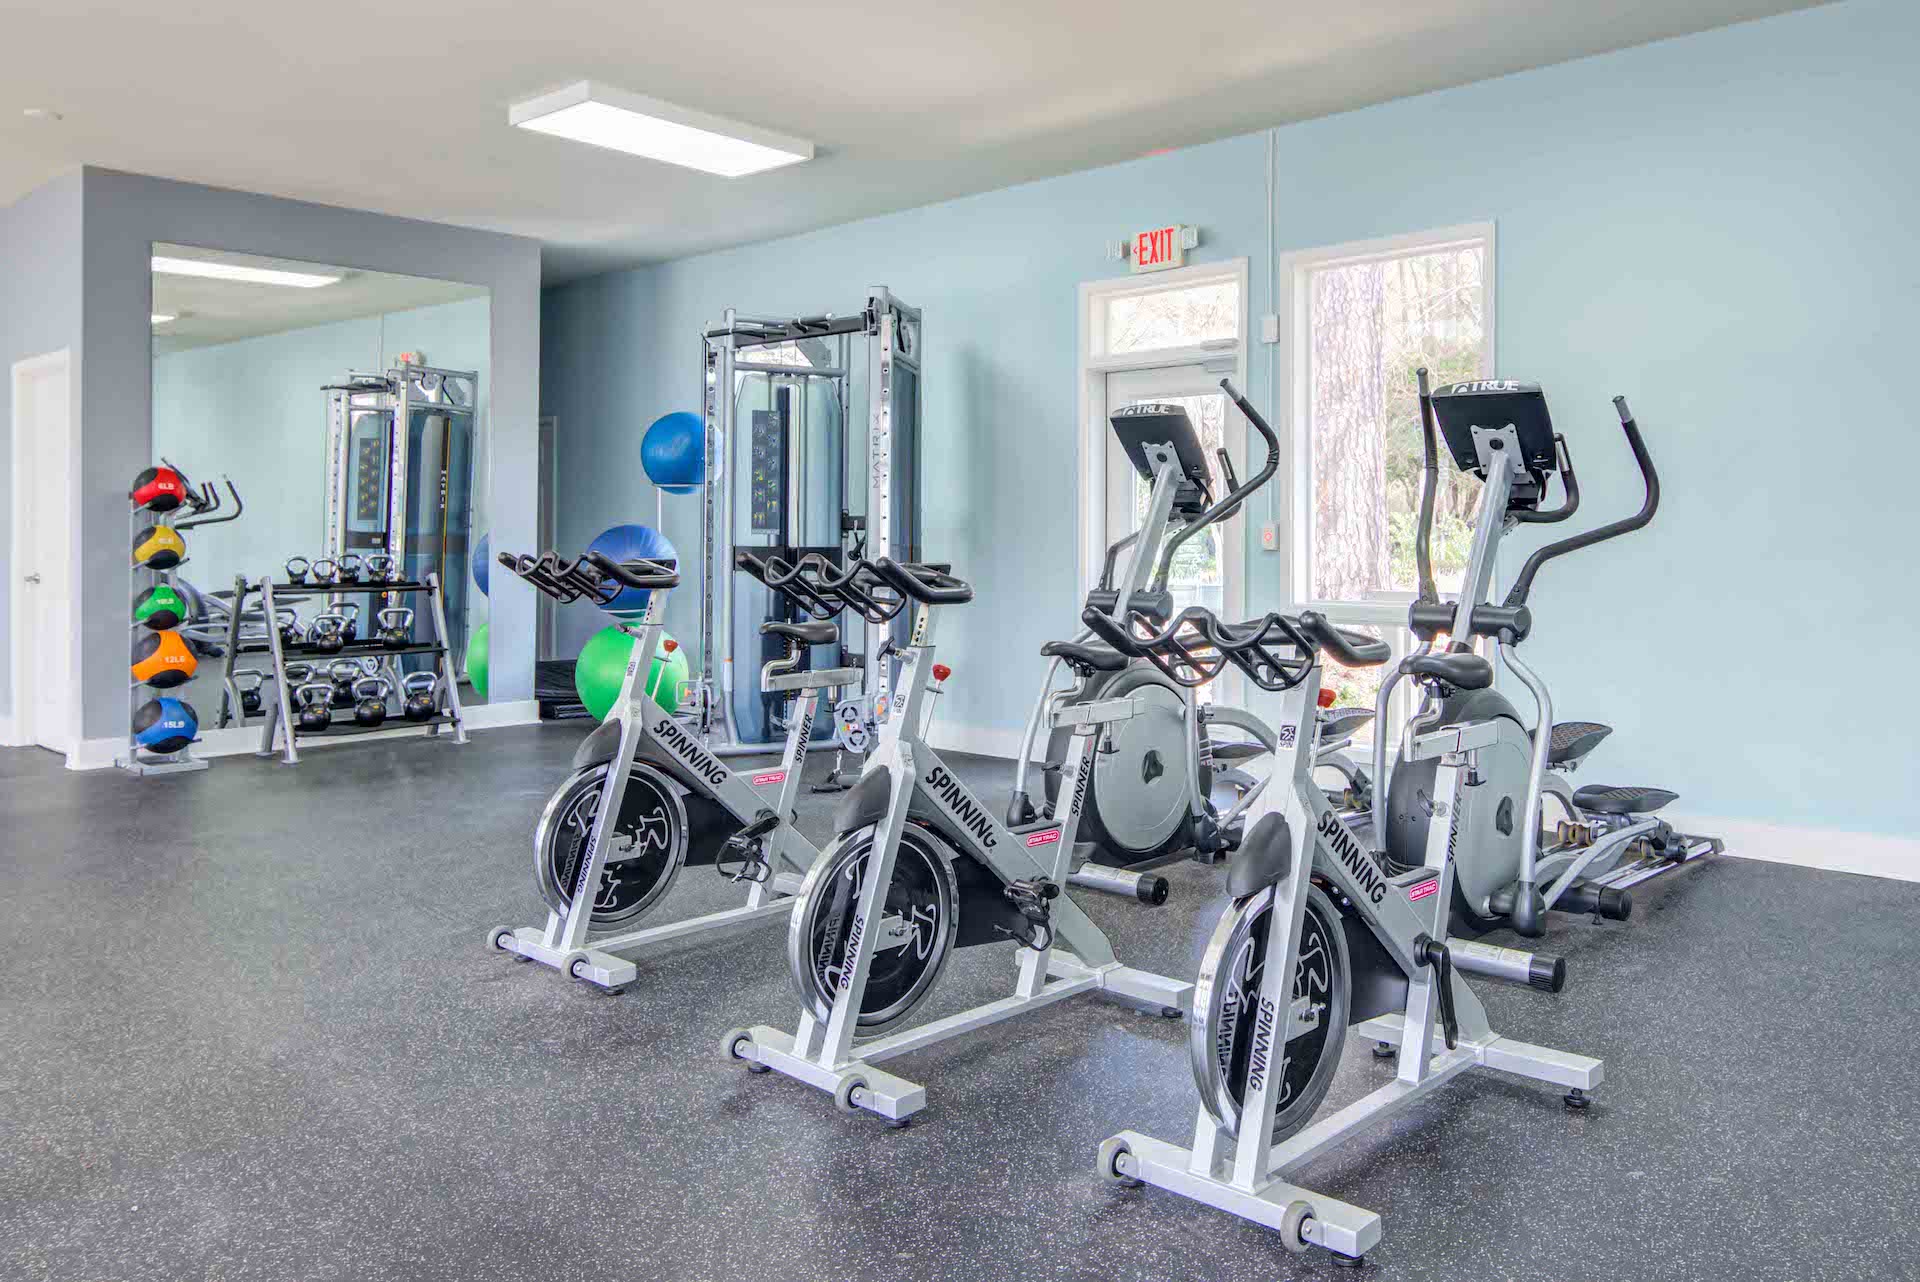 Fitness room showing multiple cycles and workout machines